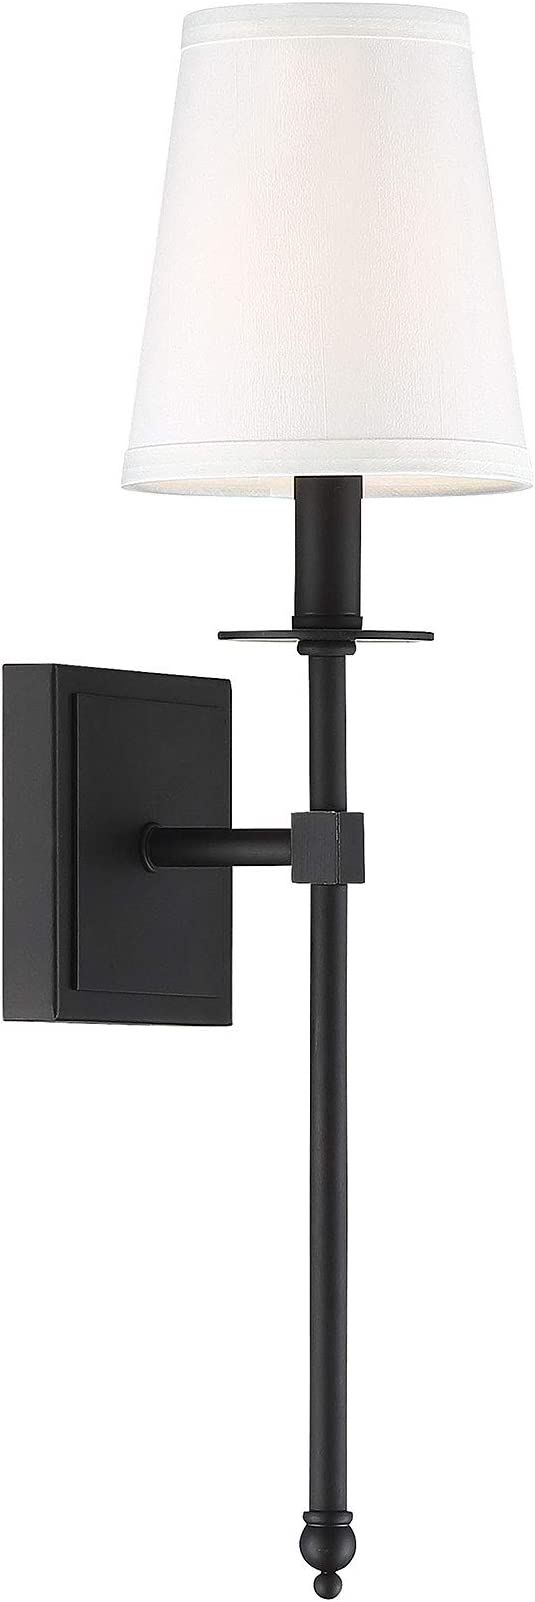 Savoy House 9-302-1-89 11" Monroe 1-Light Sconce in a Matte Black Finish with a Fabric Shade, 60 ... | Amazon (US)